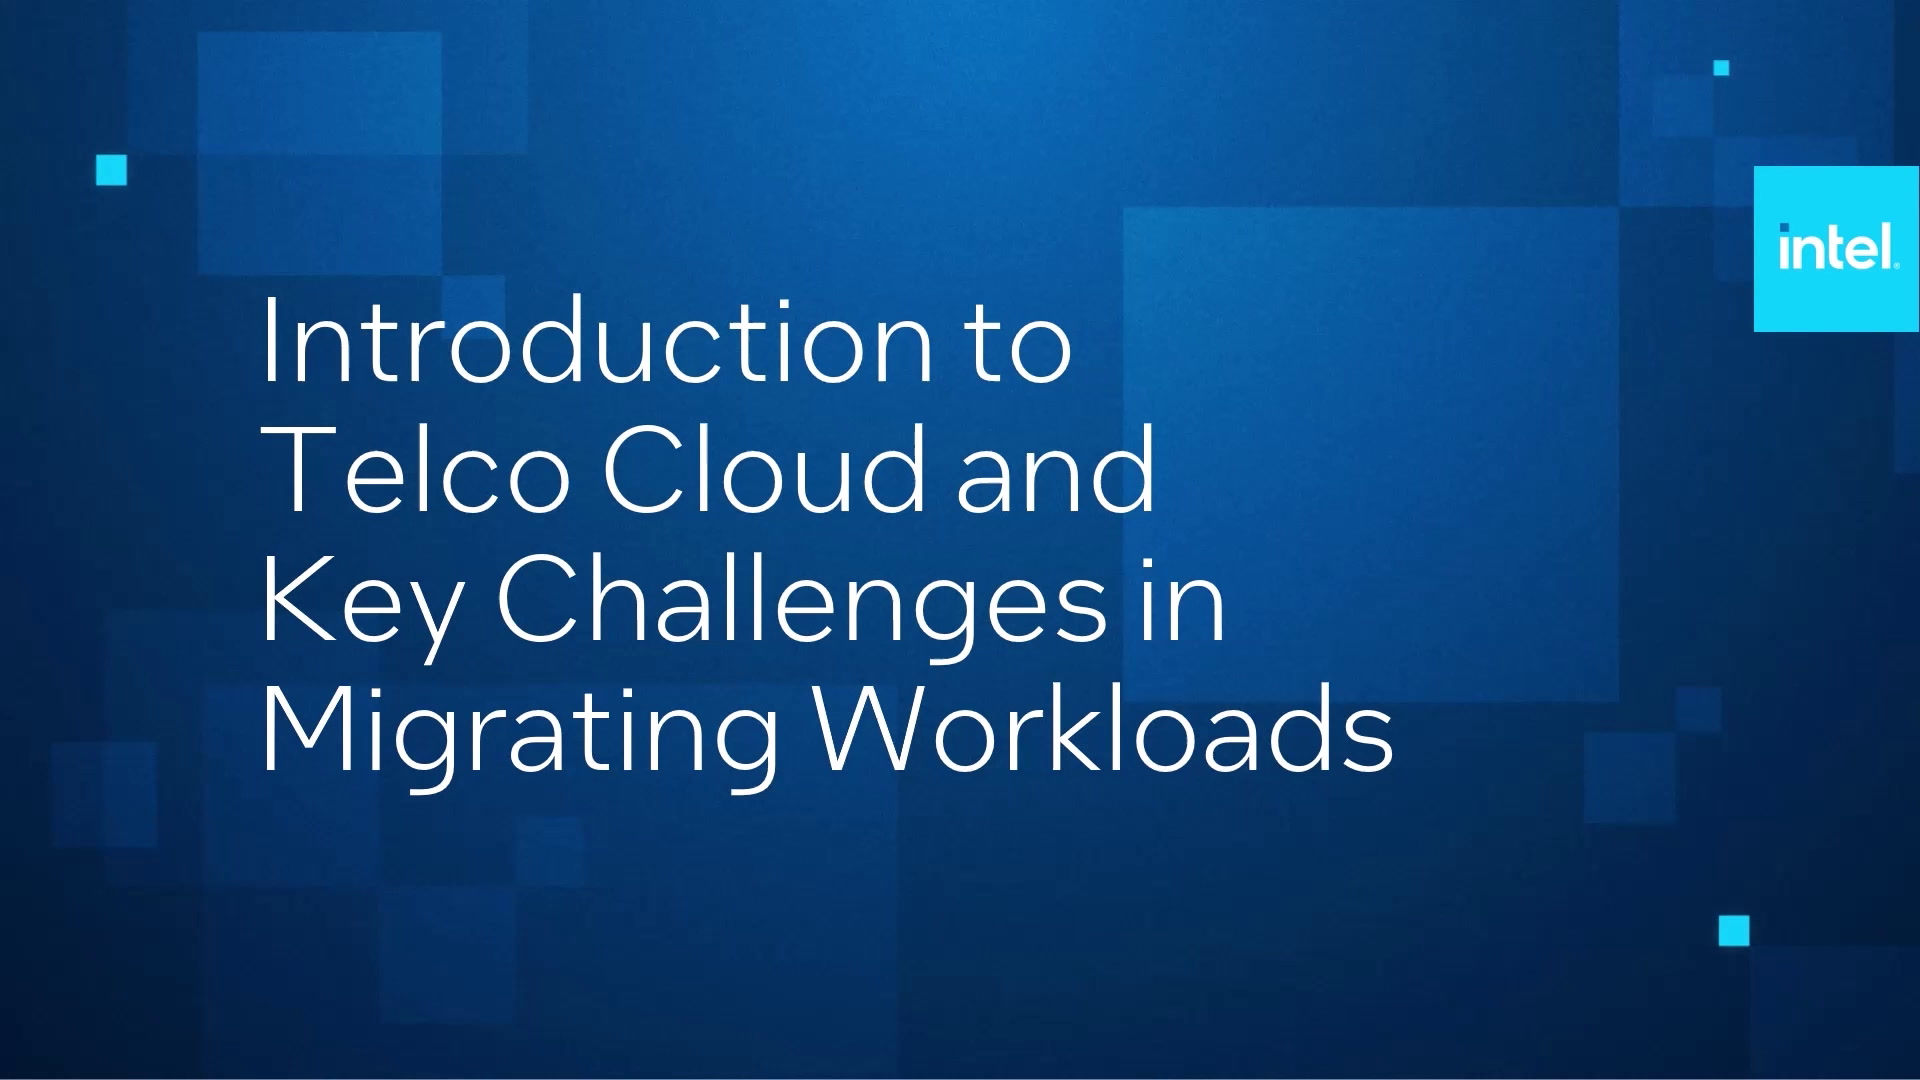 Introduction to Telco Cloud & Key Requirements in Migrating Workloads